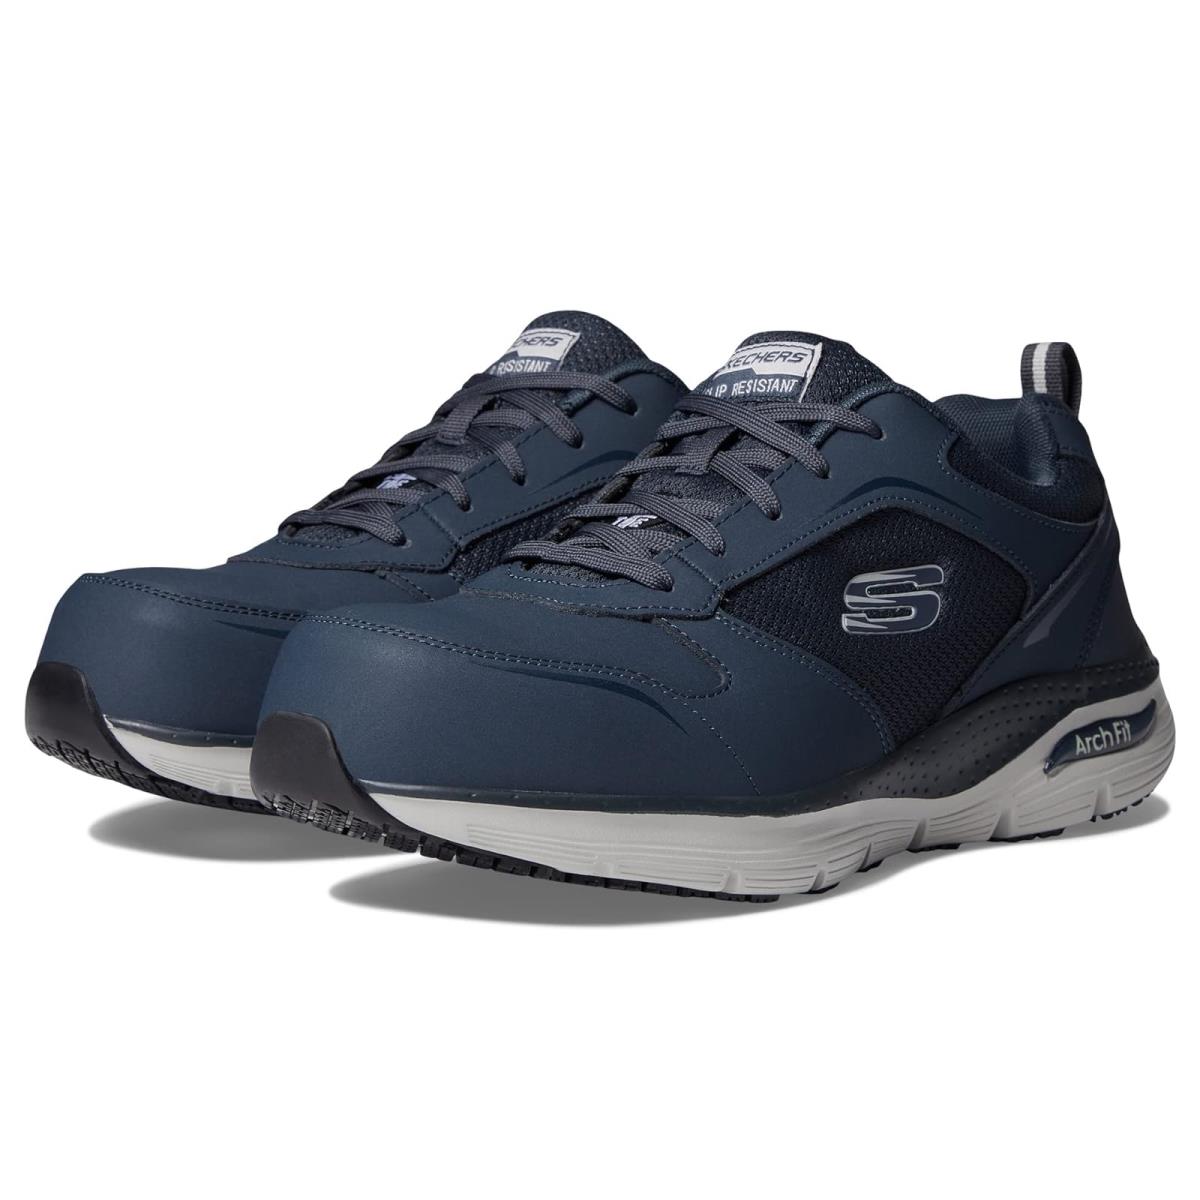 Man`s Sneakers Athletic Shoes Skechers Work Arch Fit SR Comp Toe Navy/Gray